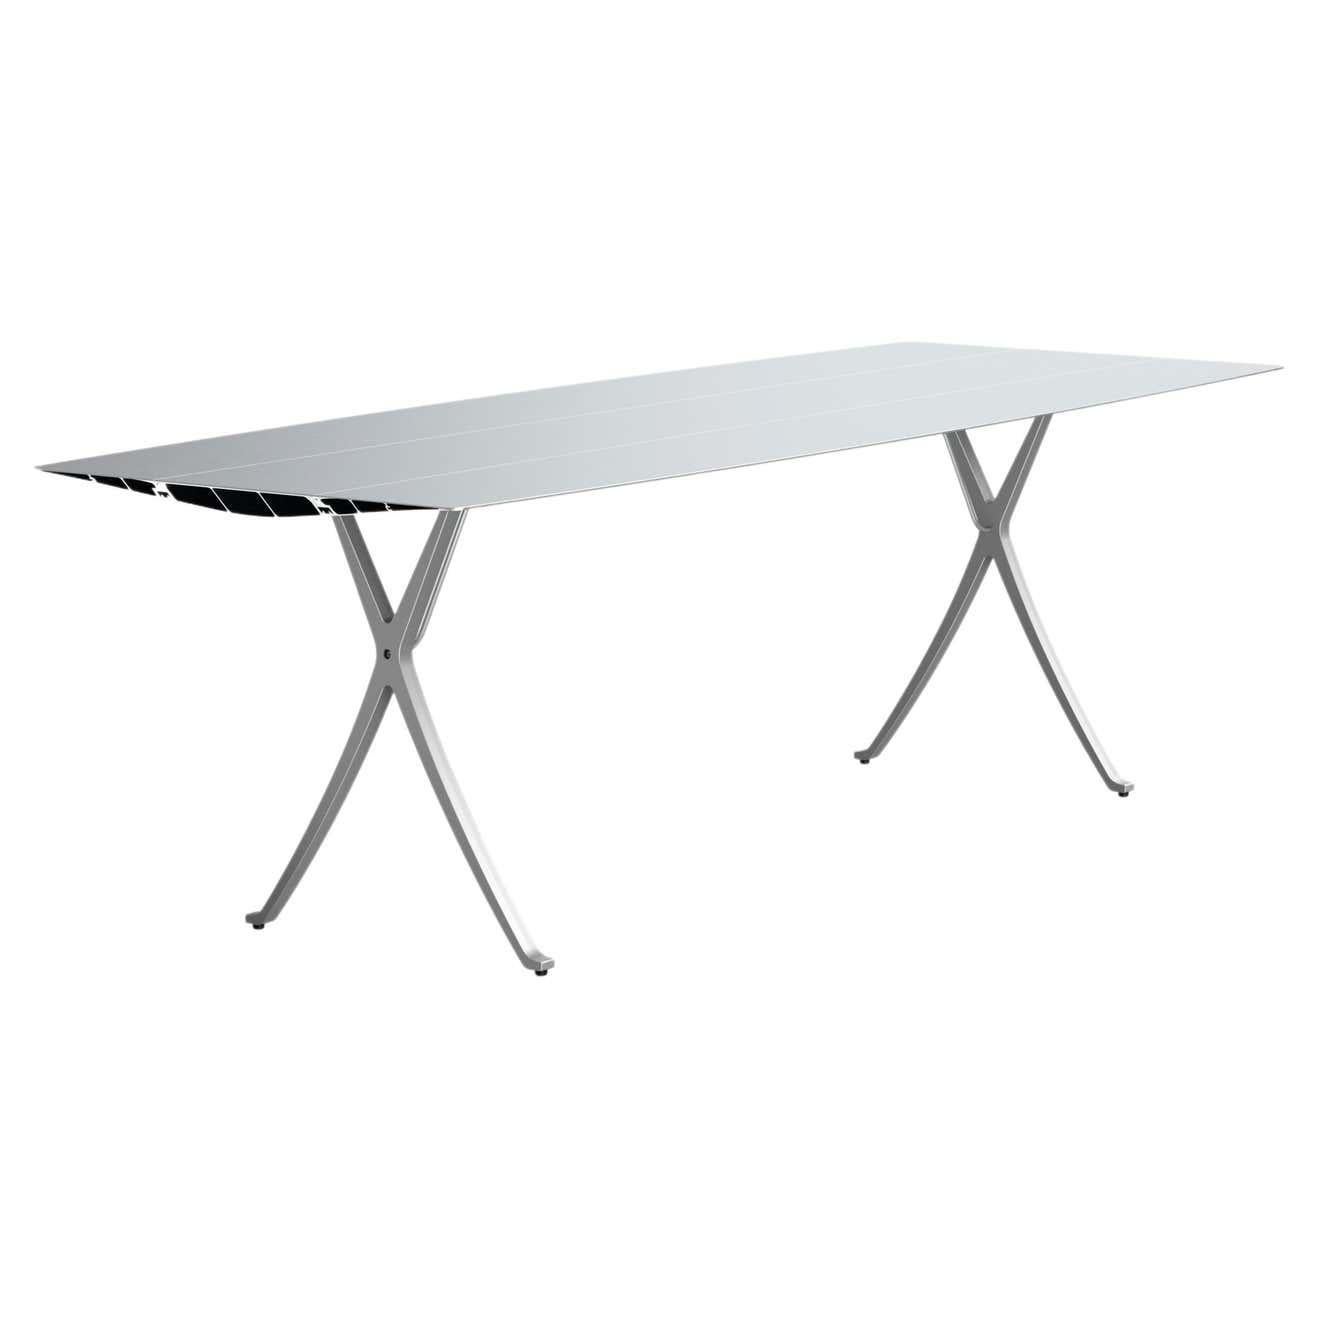 Outdoor Garden Table B 90cm Anodized Silver Top with Aluminum Legs For Sale